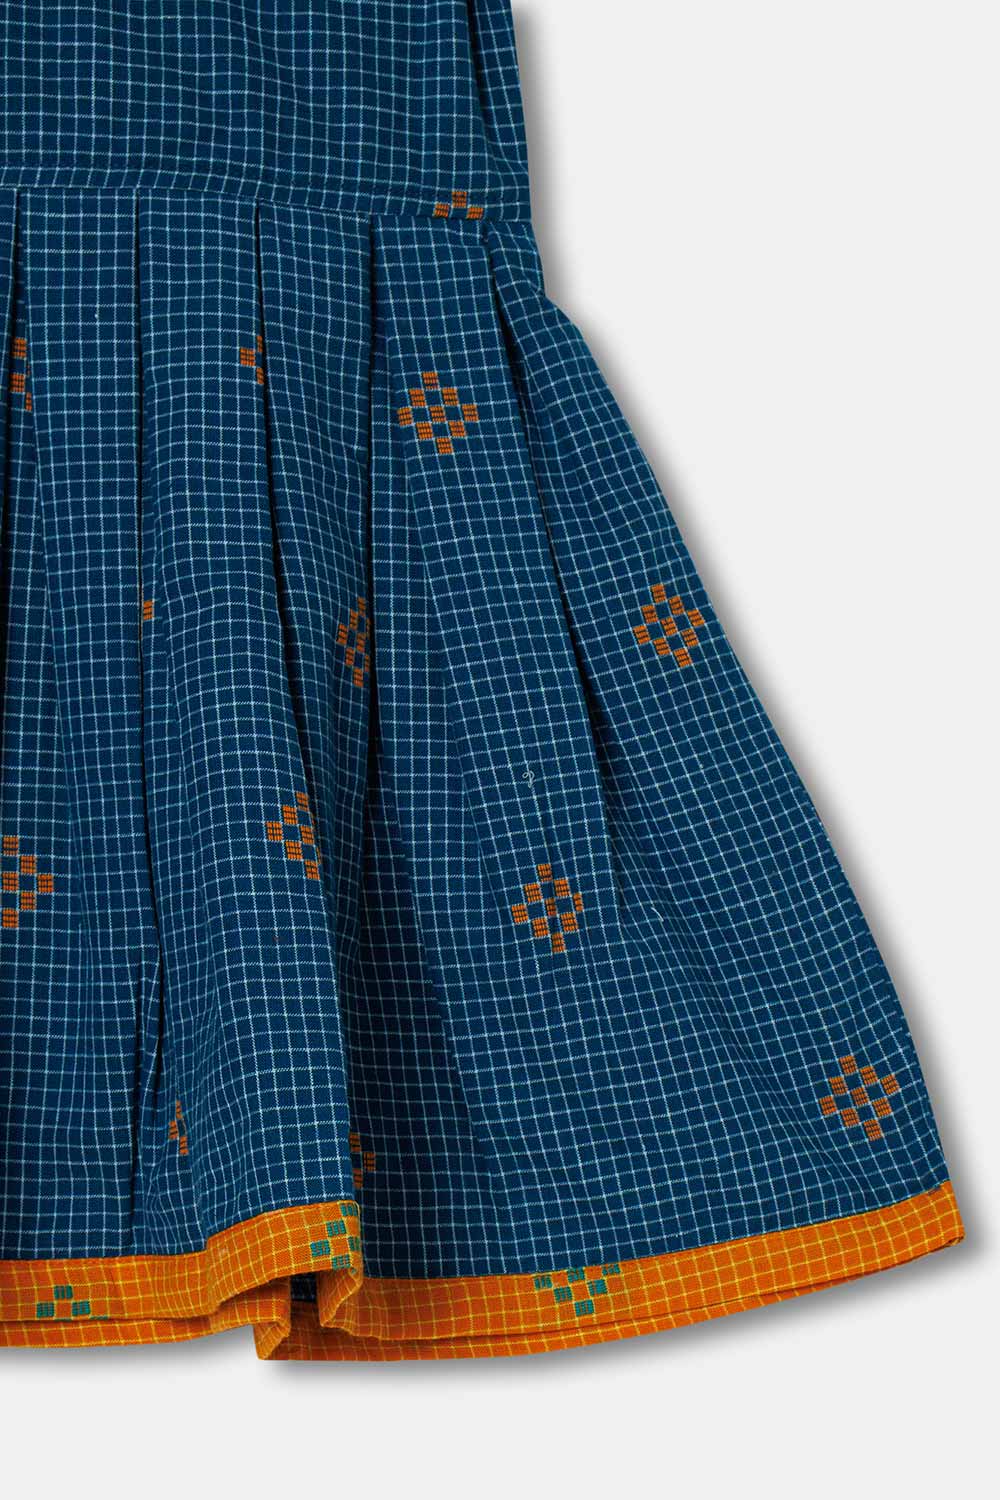 Chittythalli Girls Ethnic Wear Frock Handloom Cotton Relaxed Fit  - Blue - FR23